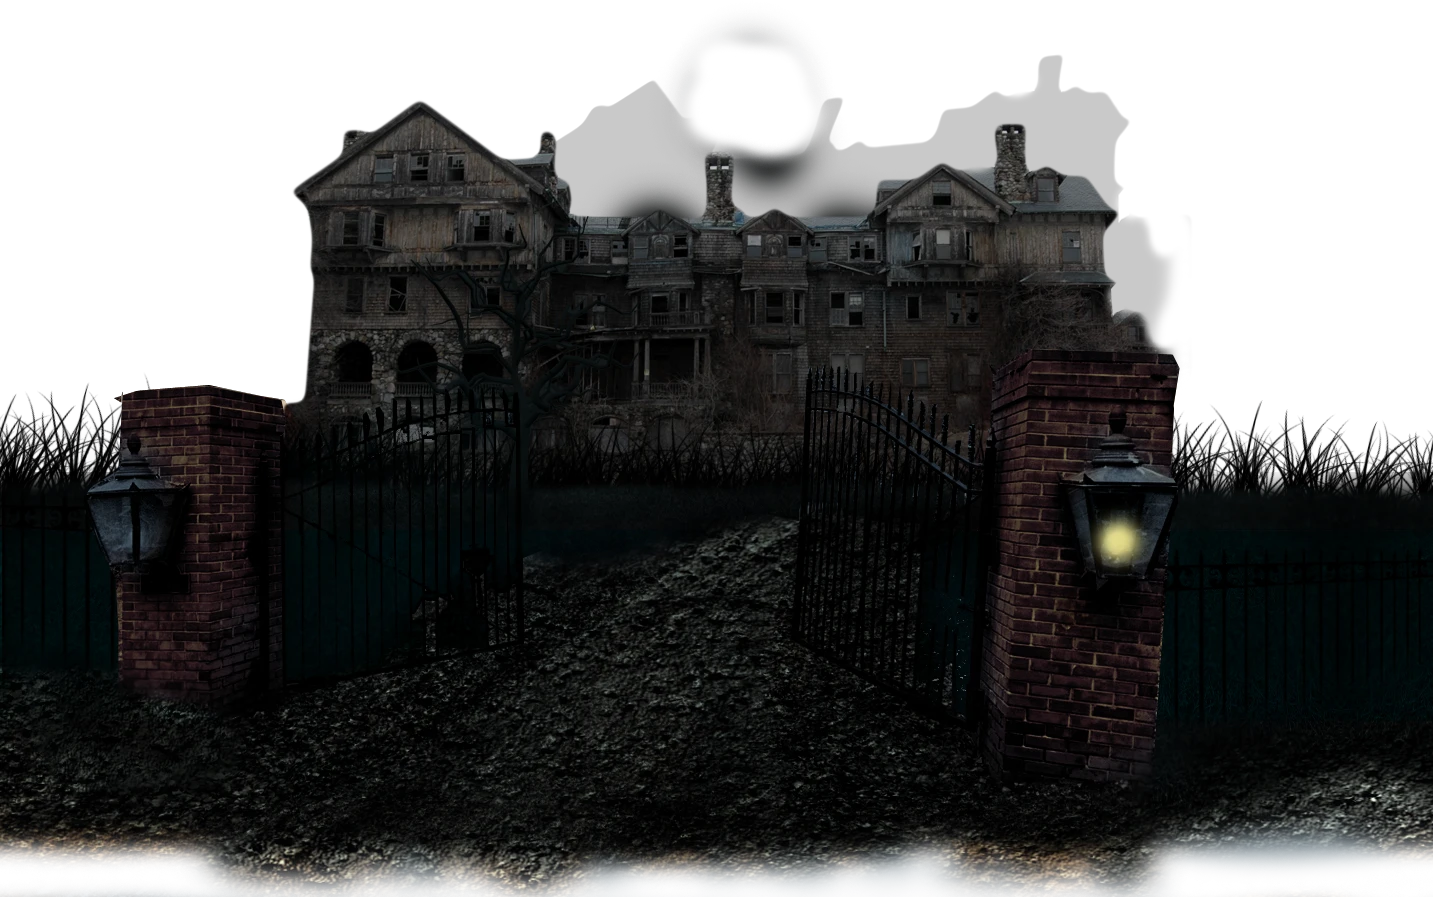 Haunted House With Brick Columns and Gate